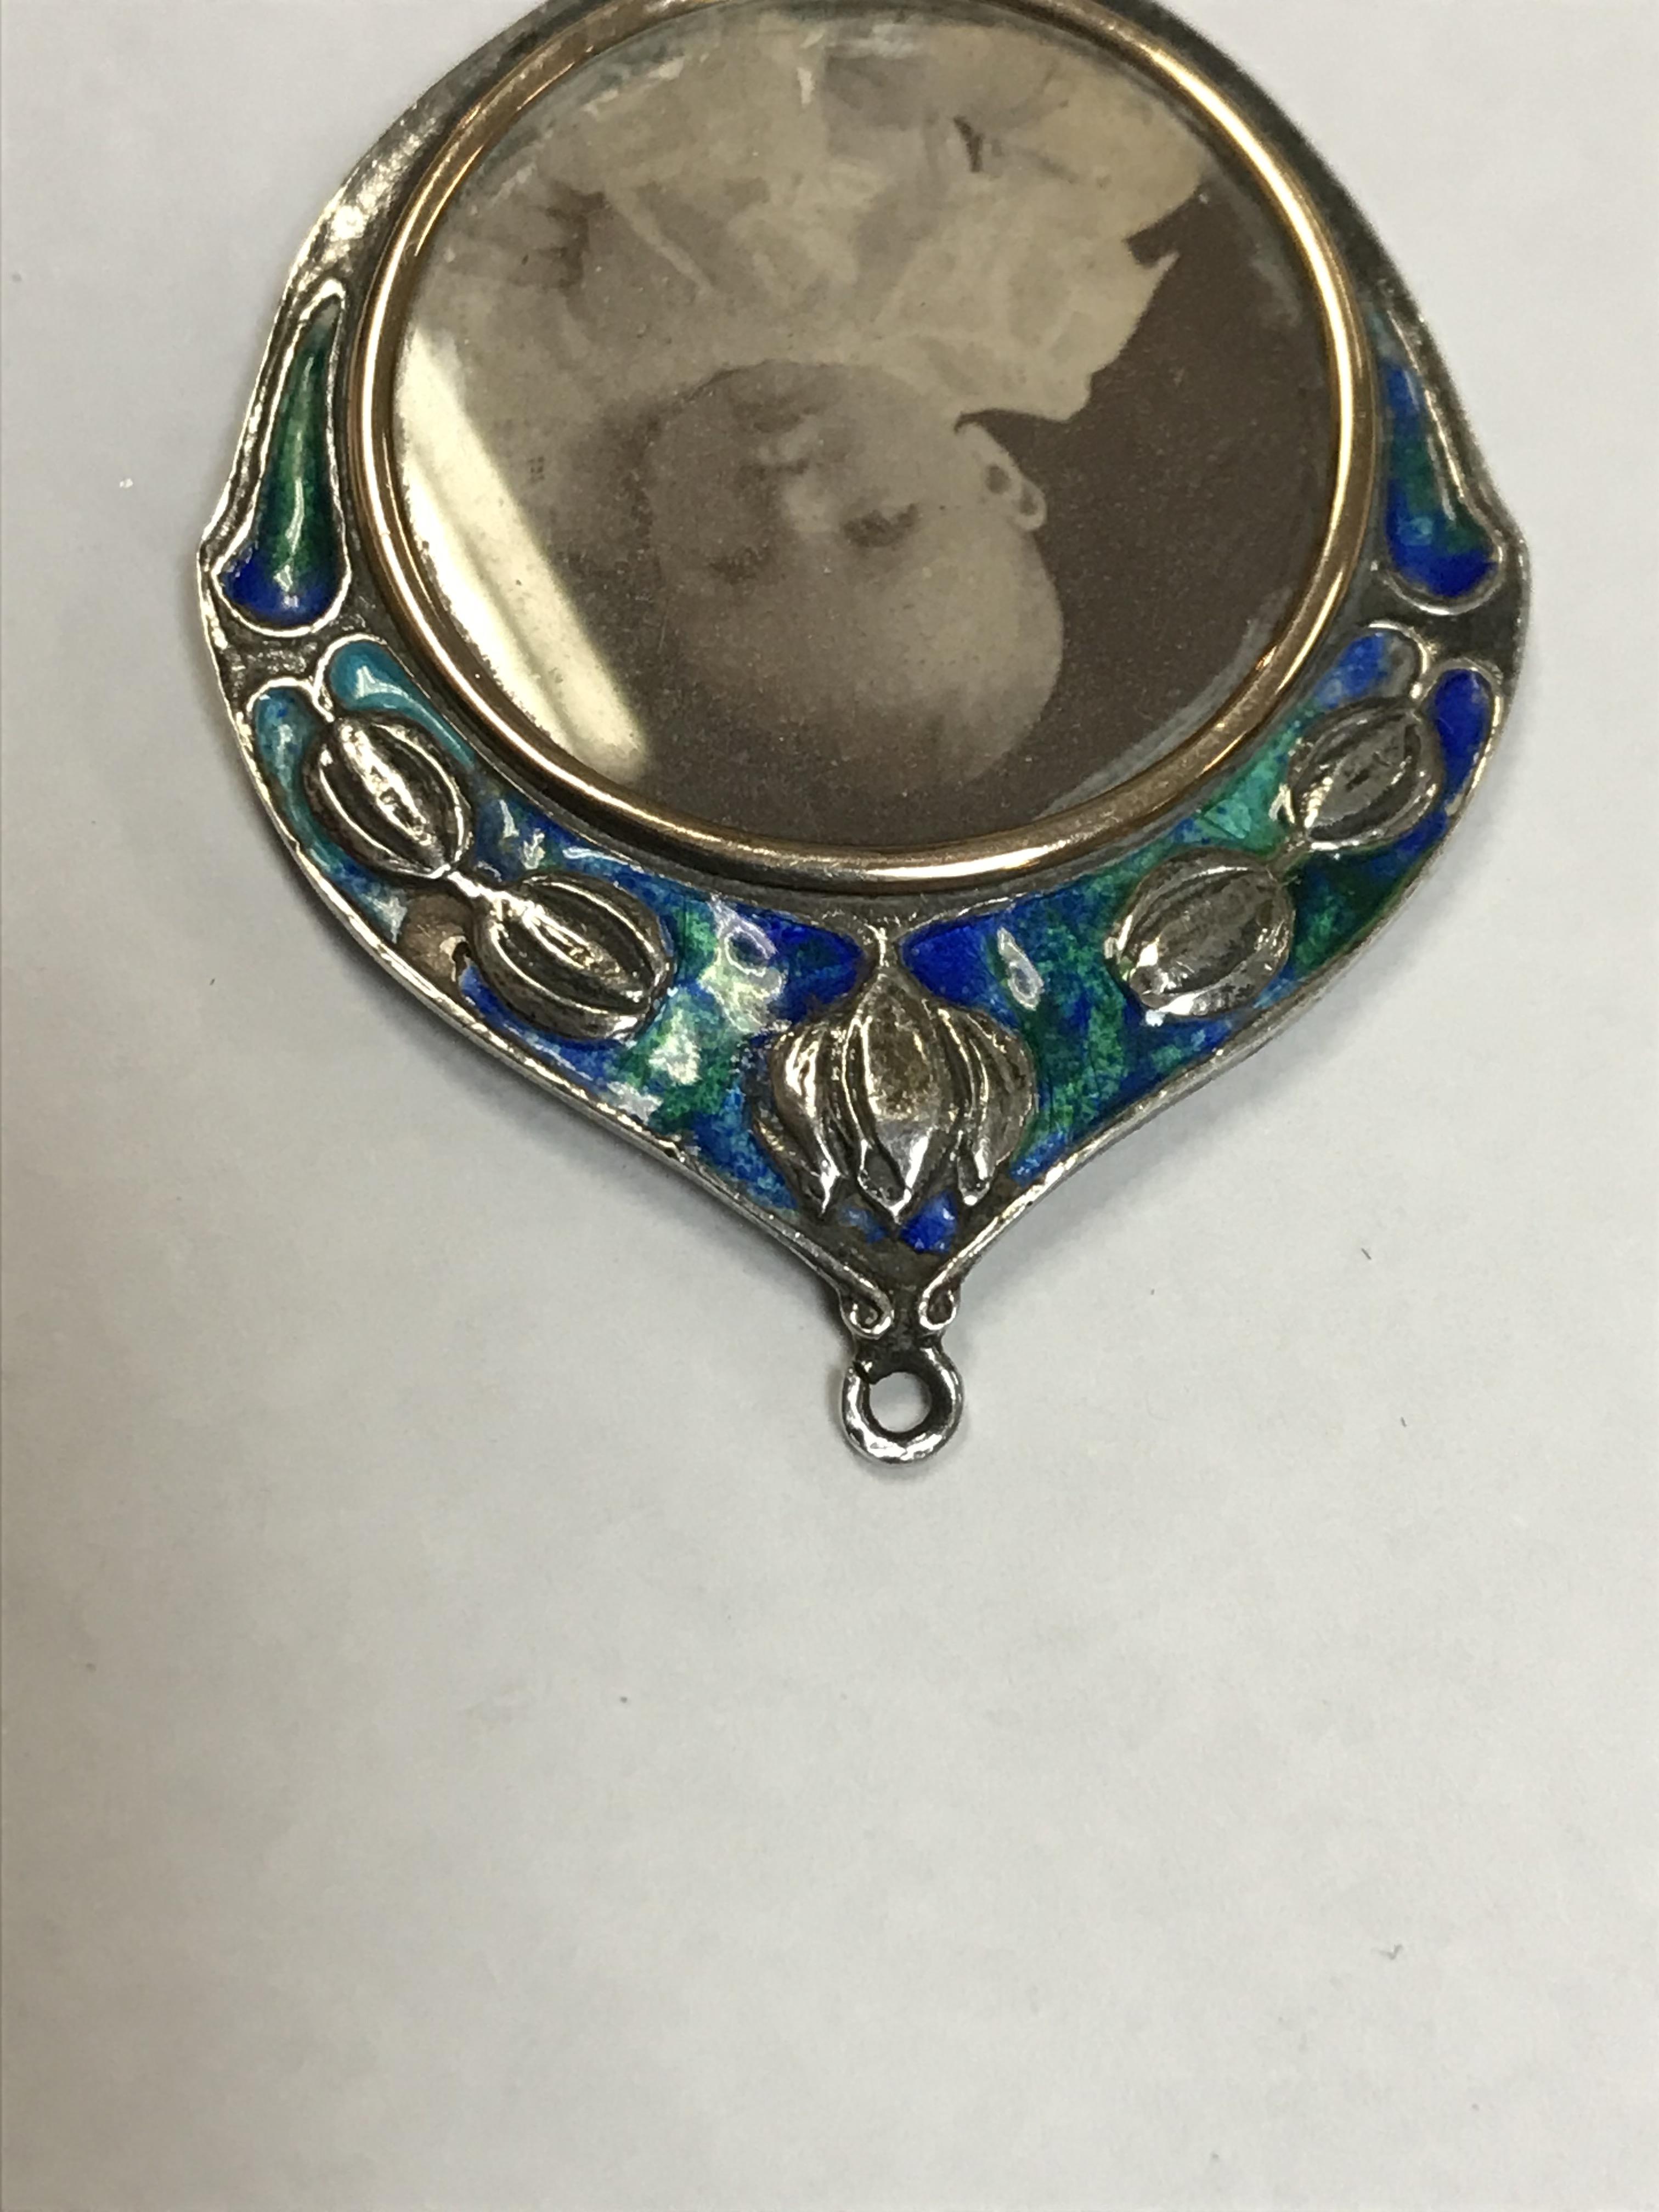 An Edwardian silver and enamel decorated pendant set with pendant locket (by William Hair Haseler, - Image 8 of 11